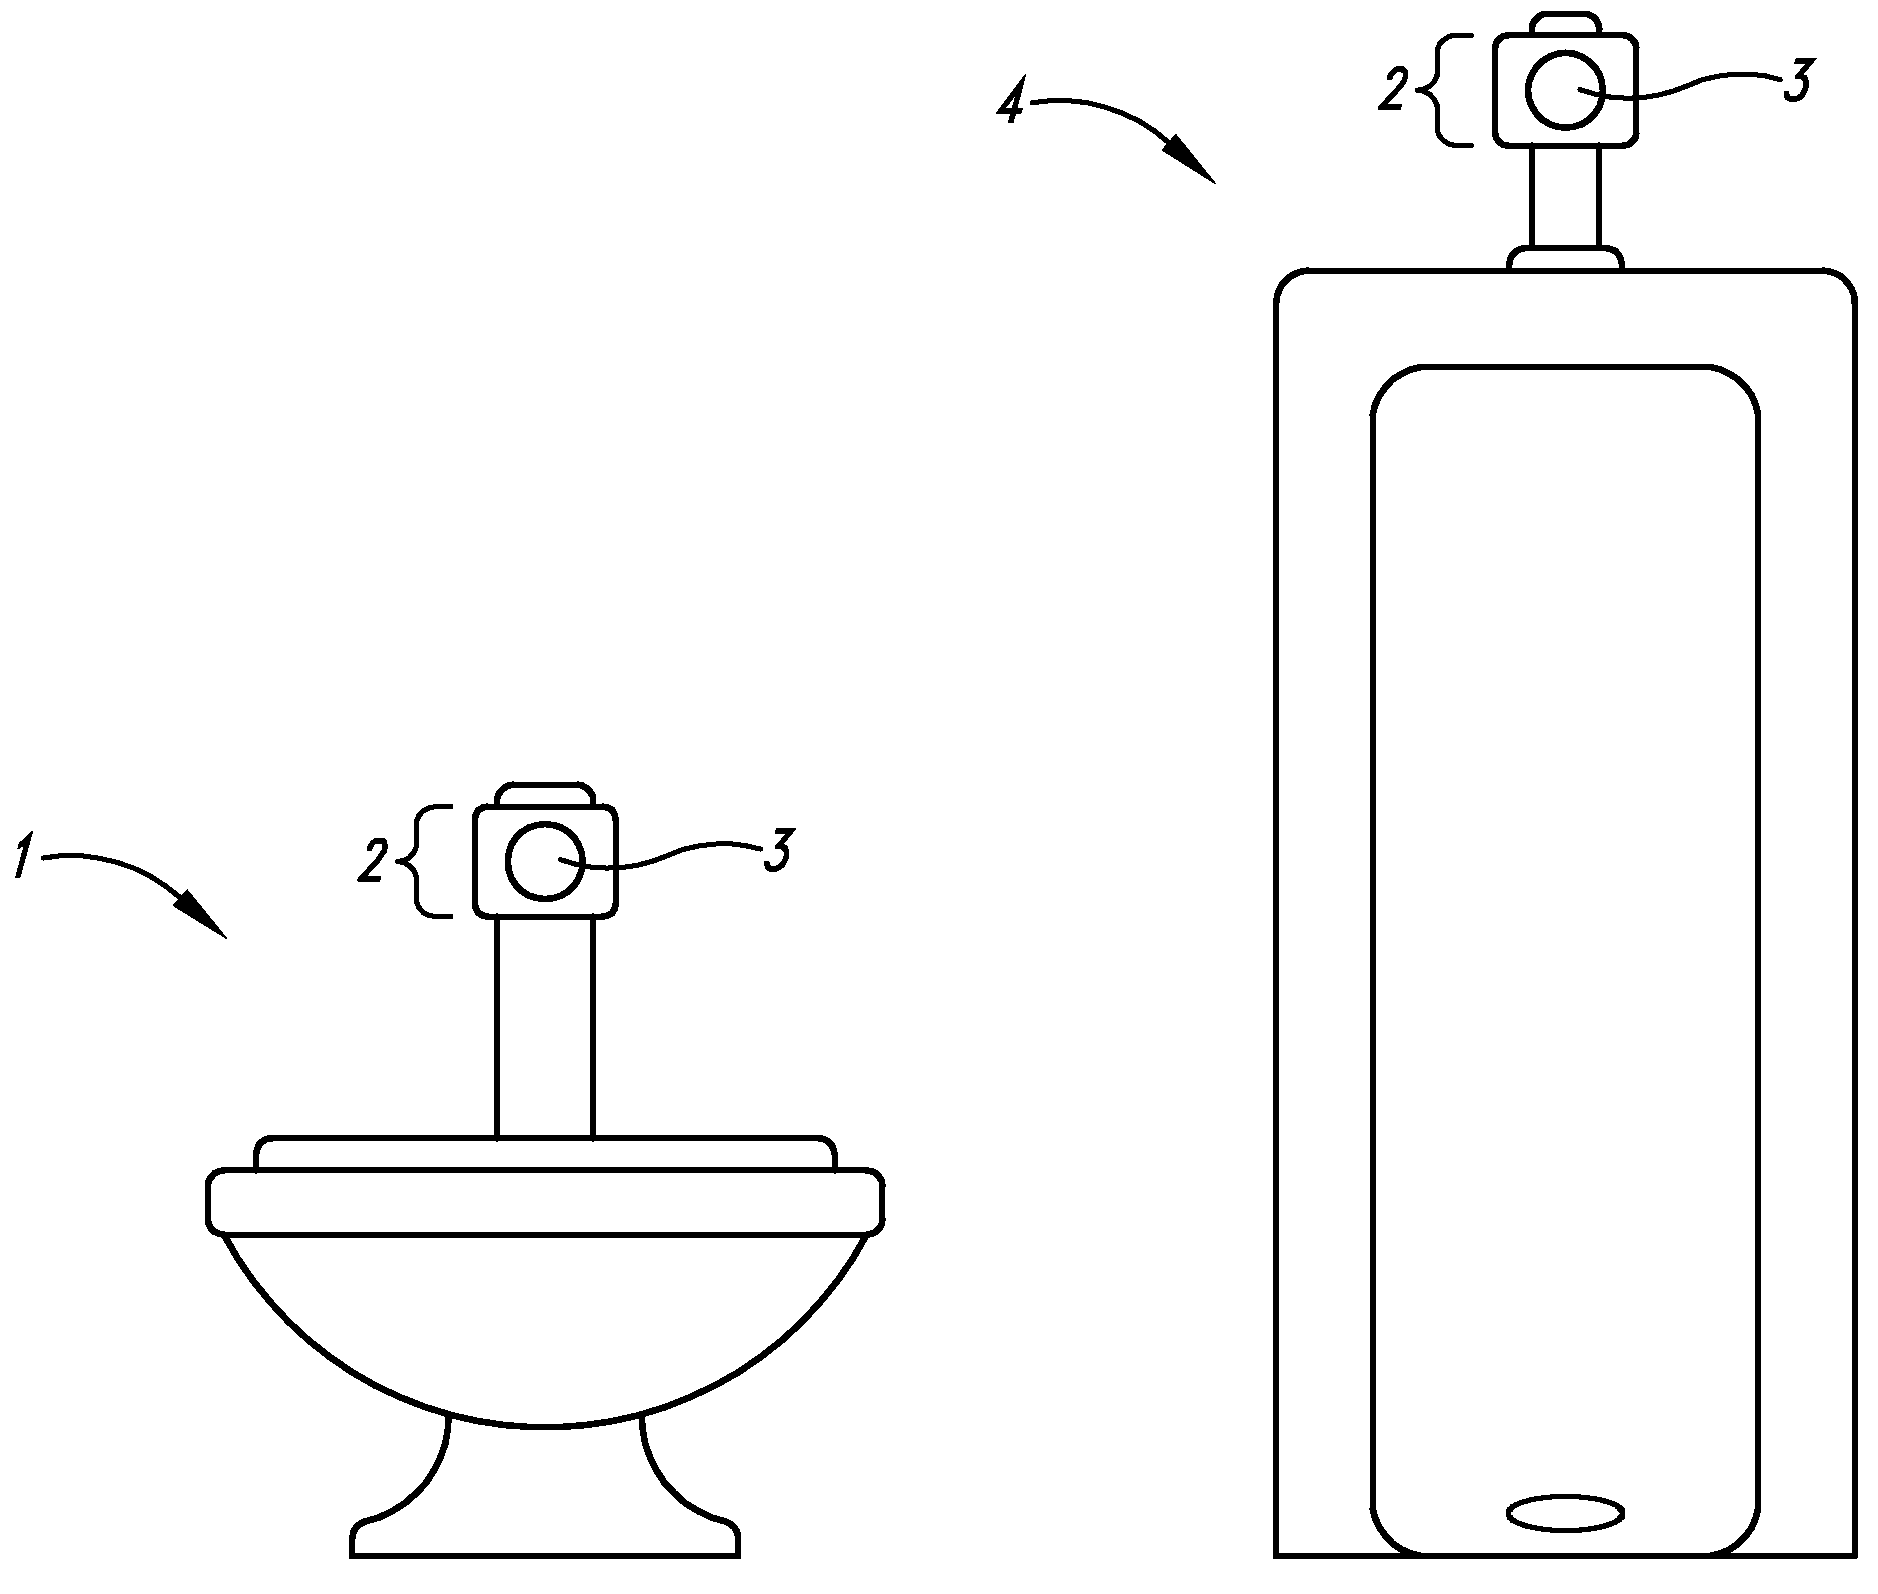 Devices, kits, and methods for temporarily stopping an automatic flushing assembly for a toilet or urinal from flushing